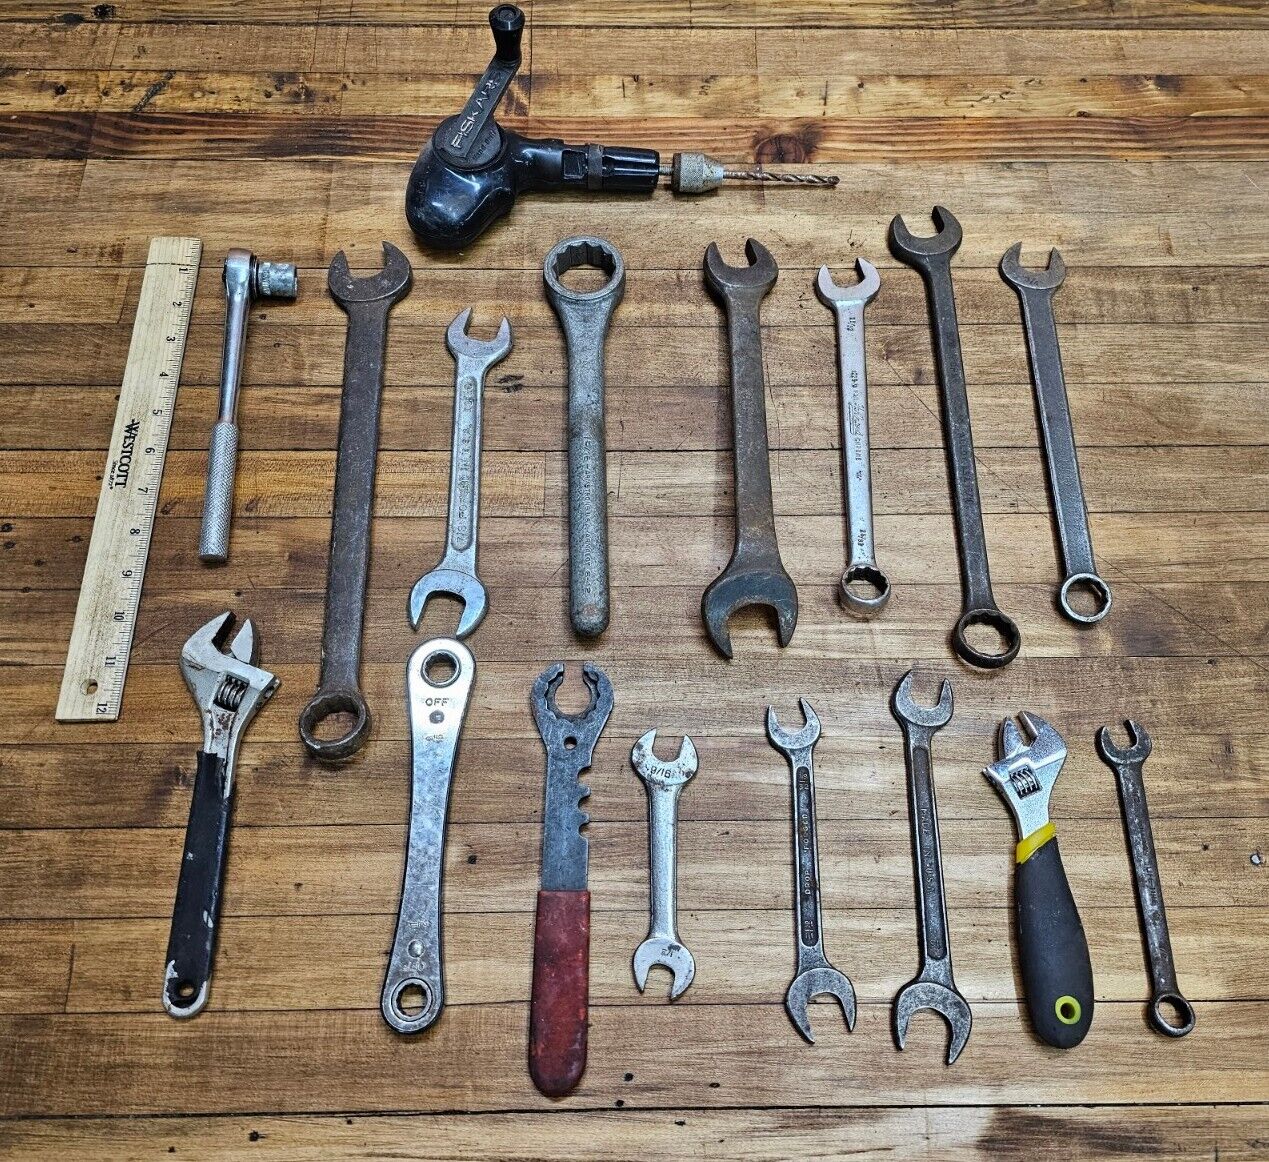 Vintage Mechanics Tools Mixed Lot Wrenches Drills Spanners Ratcheting Box End